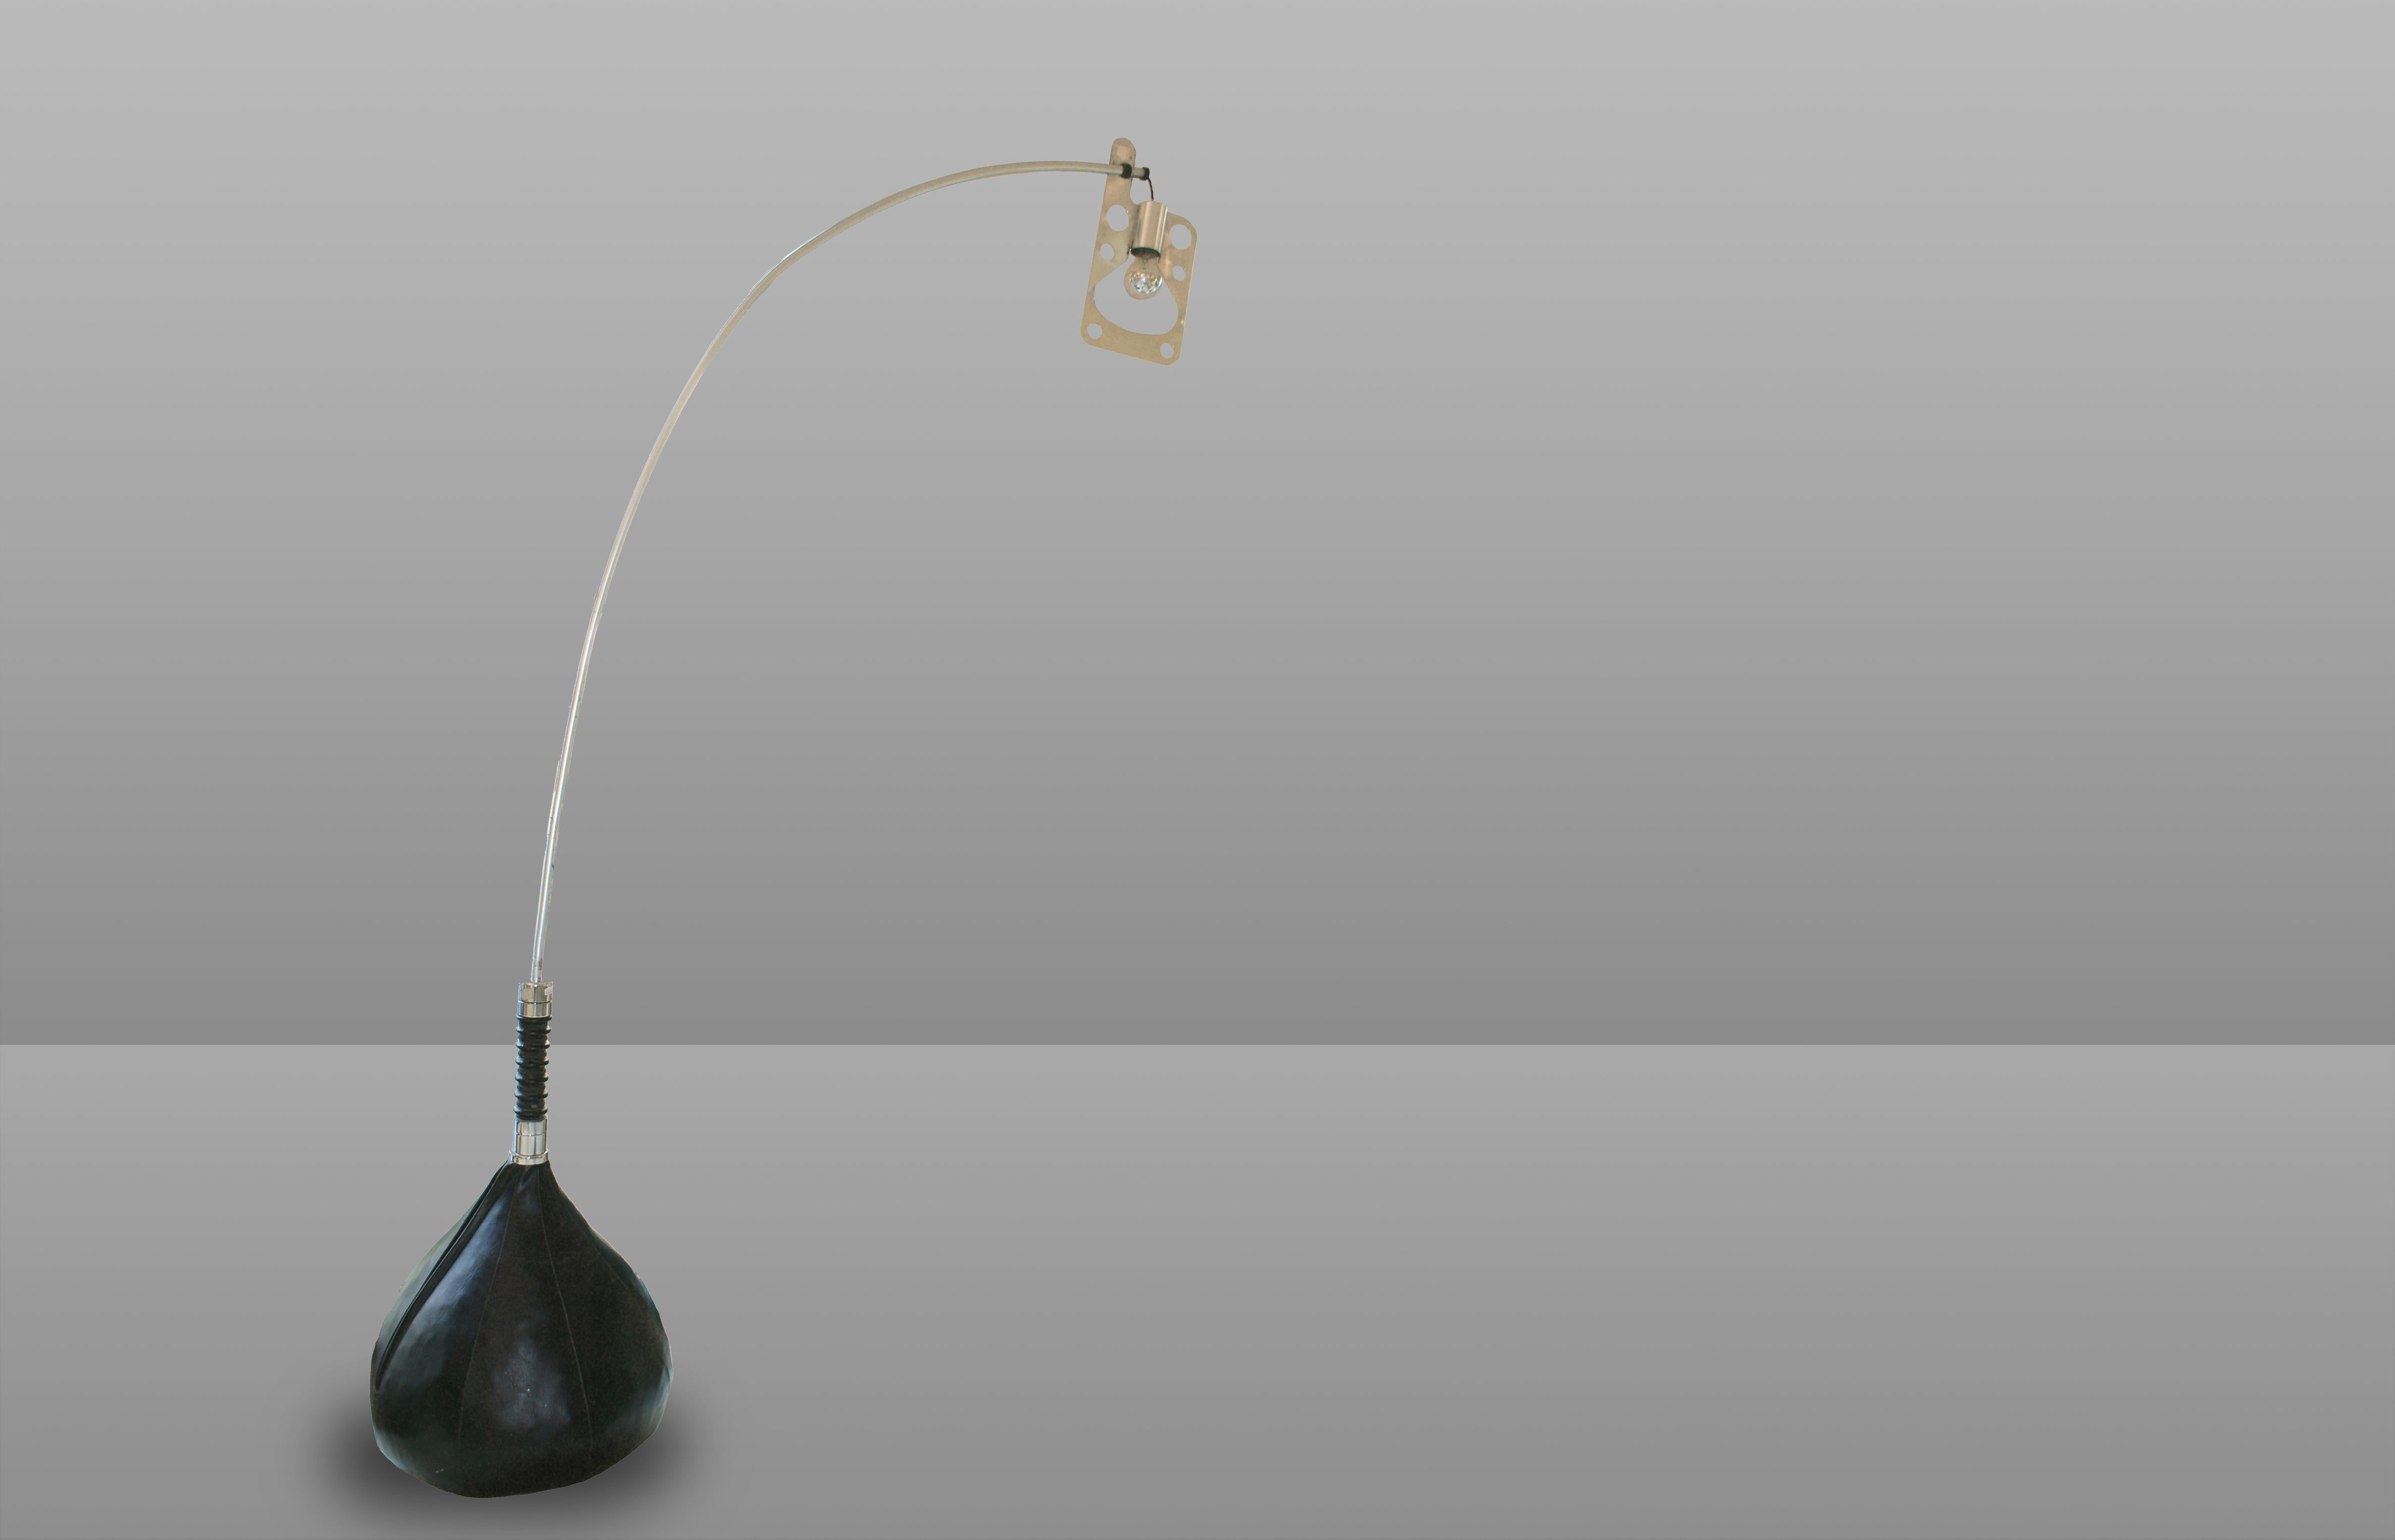 Fantastic floor lamp Bul - bo by Roberto Gabetti -Aimaro Isola, Italy, 1969. Bulb-base covered by leather and aluminum structure. 
Small series performed by G.B., Milan Arbo, H 230 cm.
 